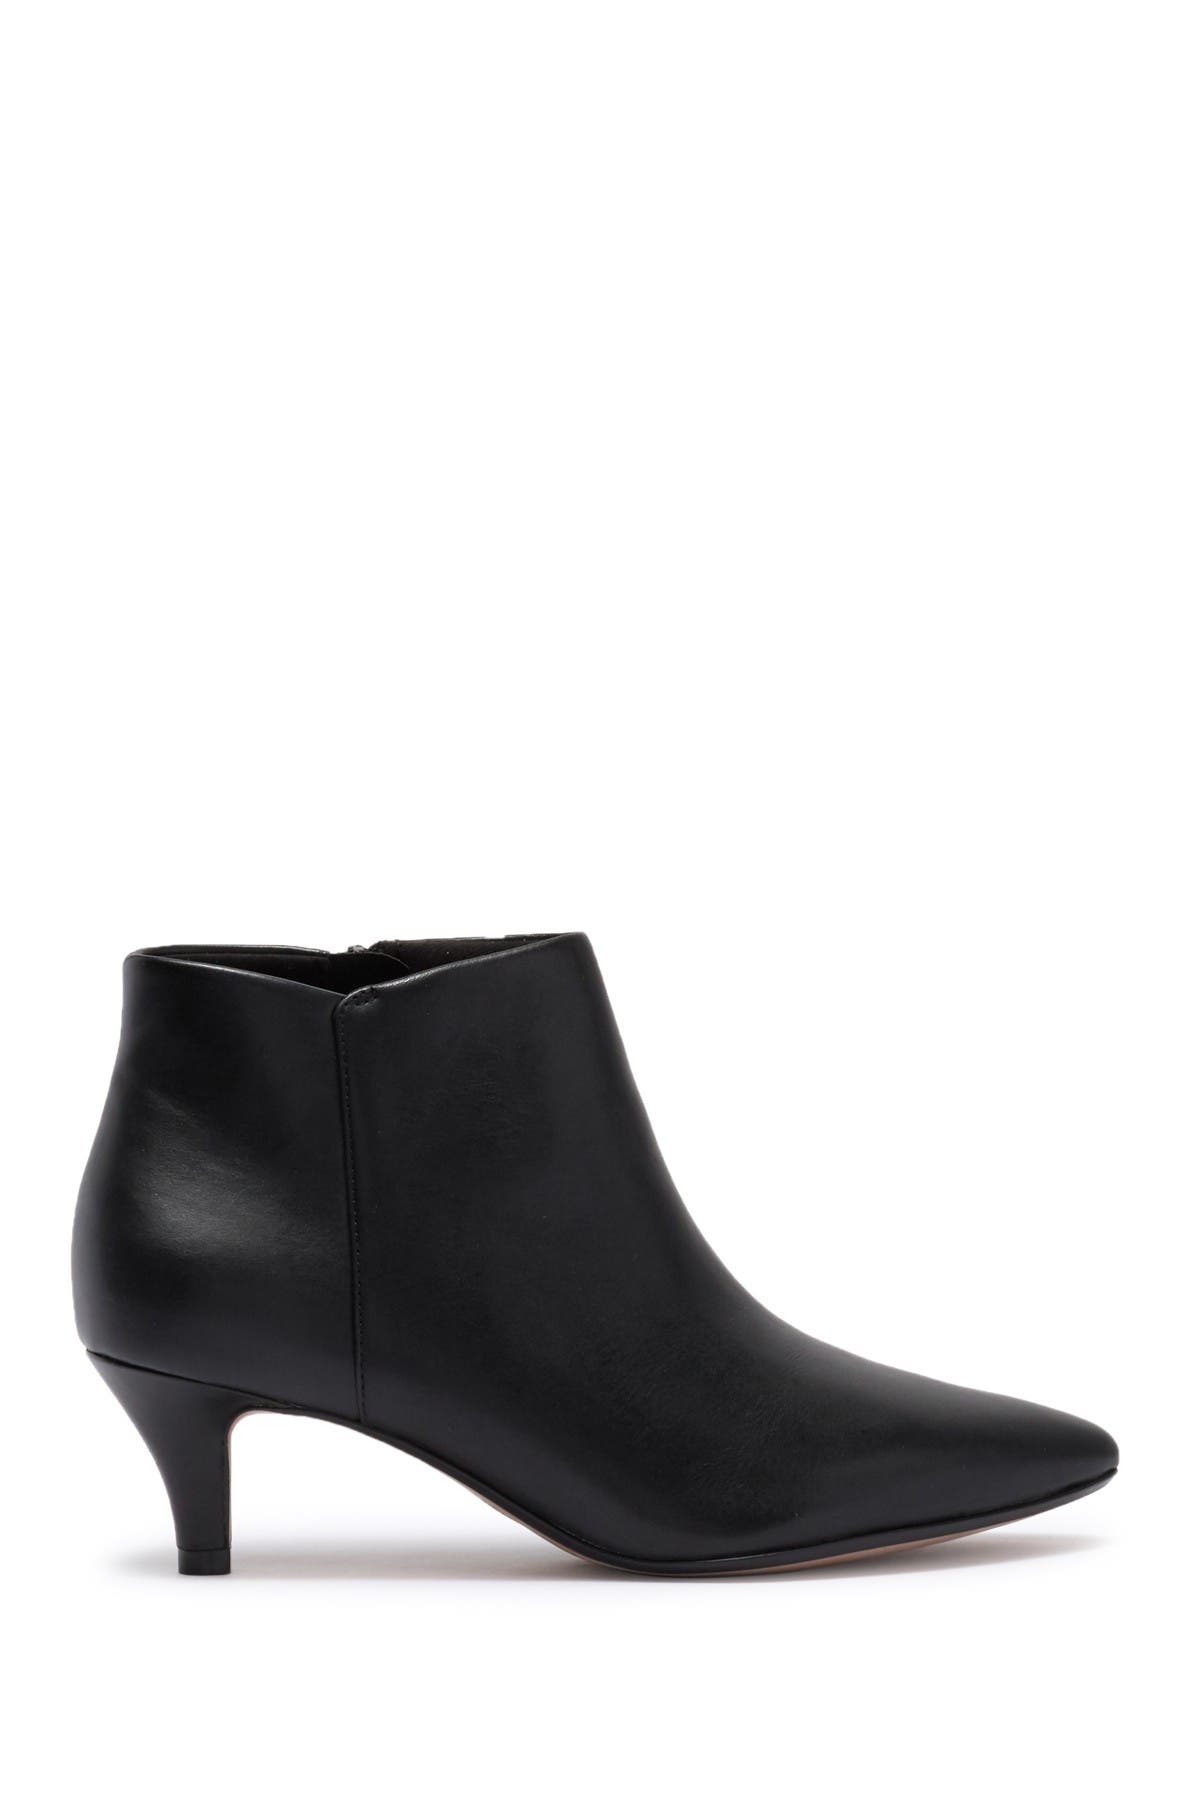 Clarks | Linvale Sea Bootie | Nordstrom 